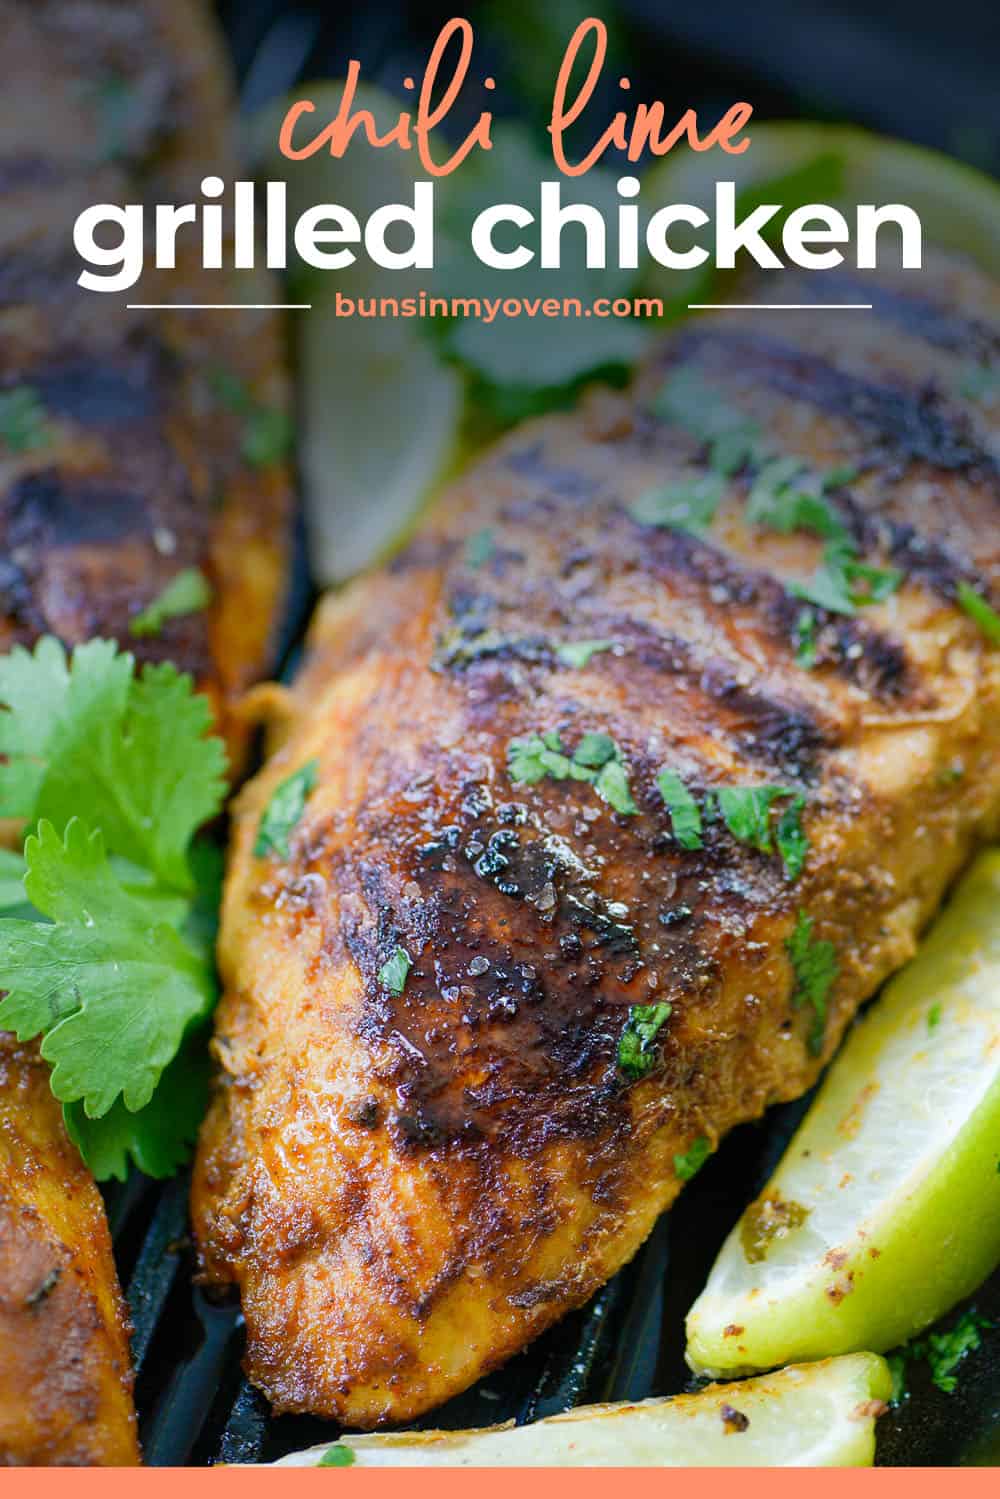 grilled chili lime chicken surrounded by lime wedges.